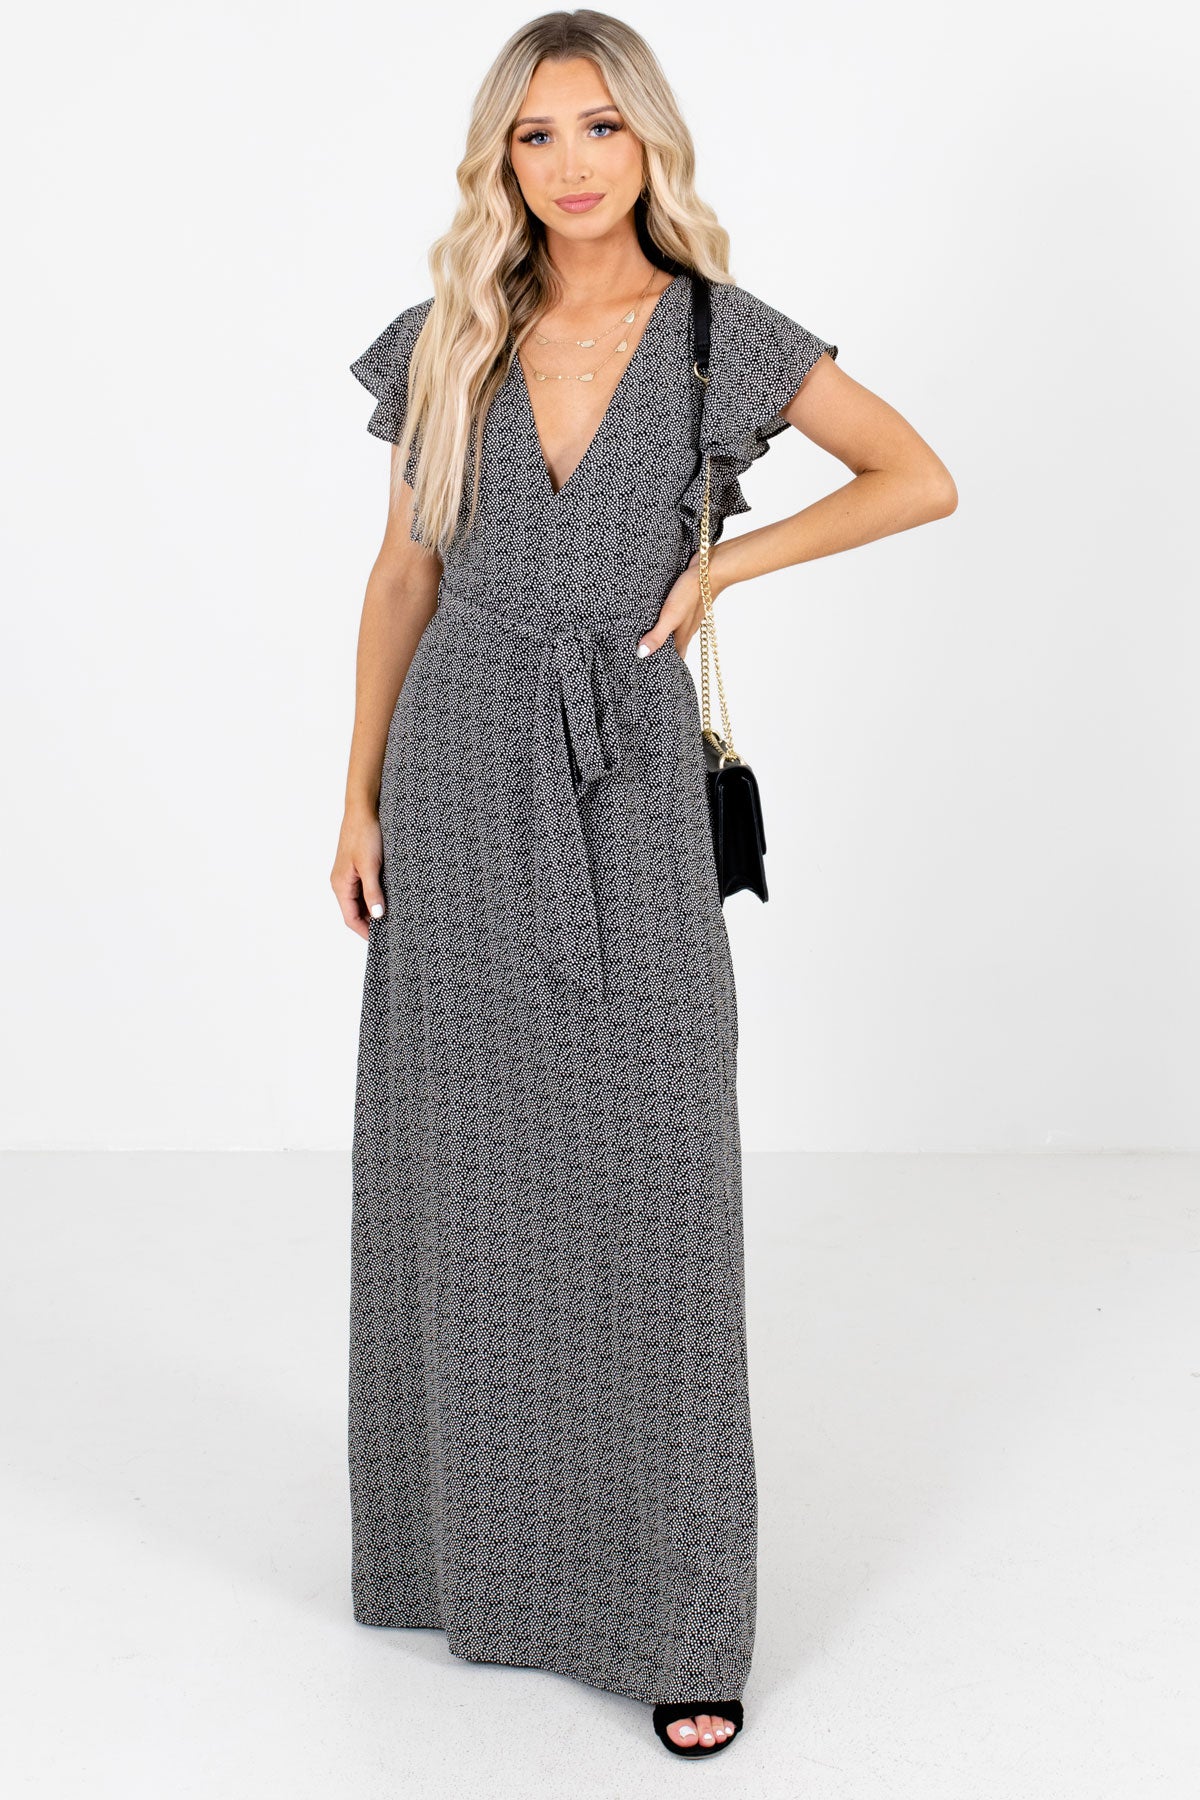 Black and White Abstract Polka Dot Patterned Boutique Maxi Dresses for Women